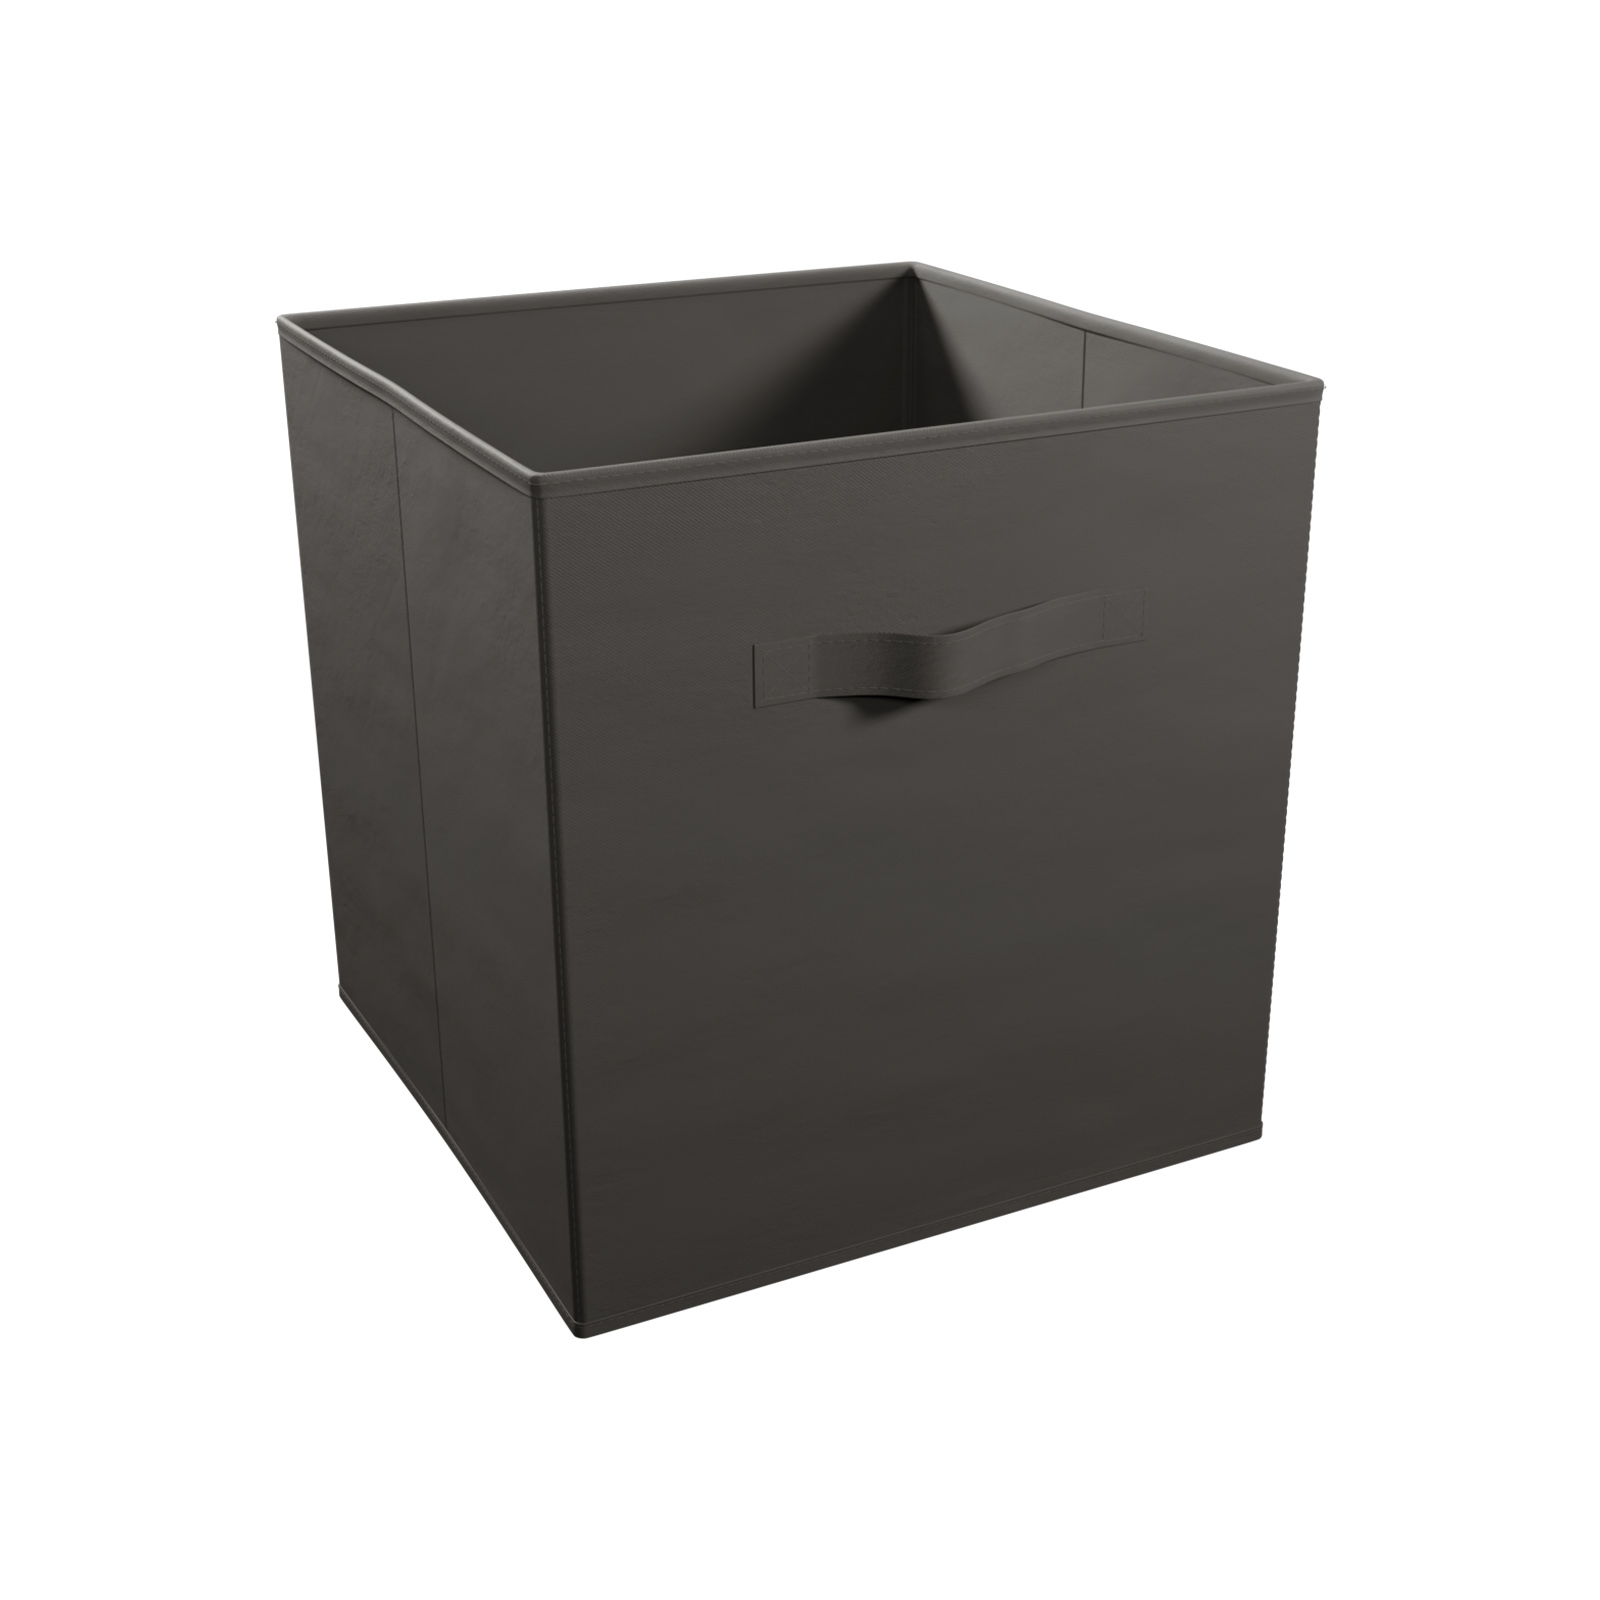 Clever Cube Compact Fabric Insert Pewter